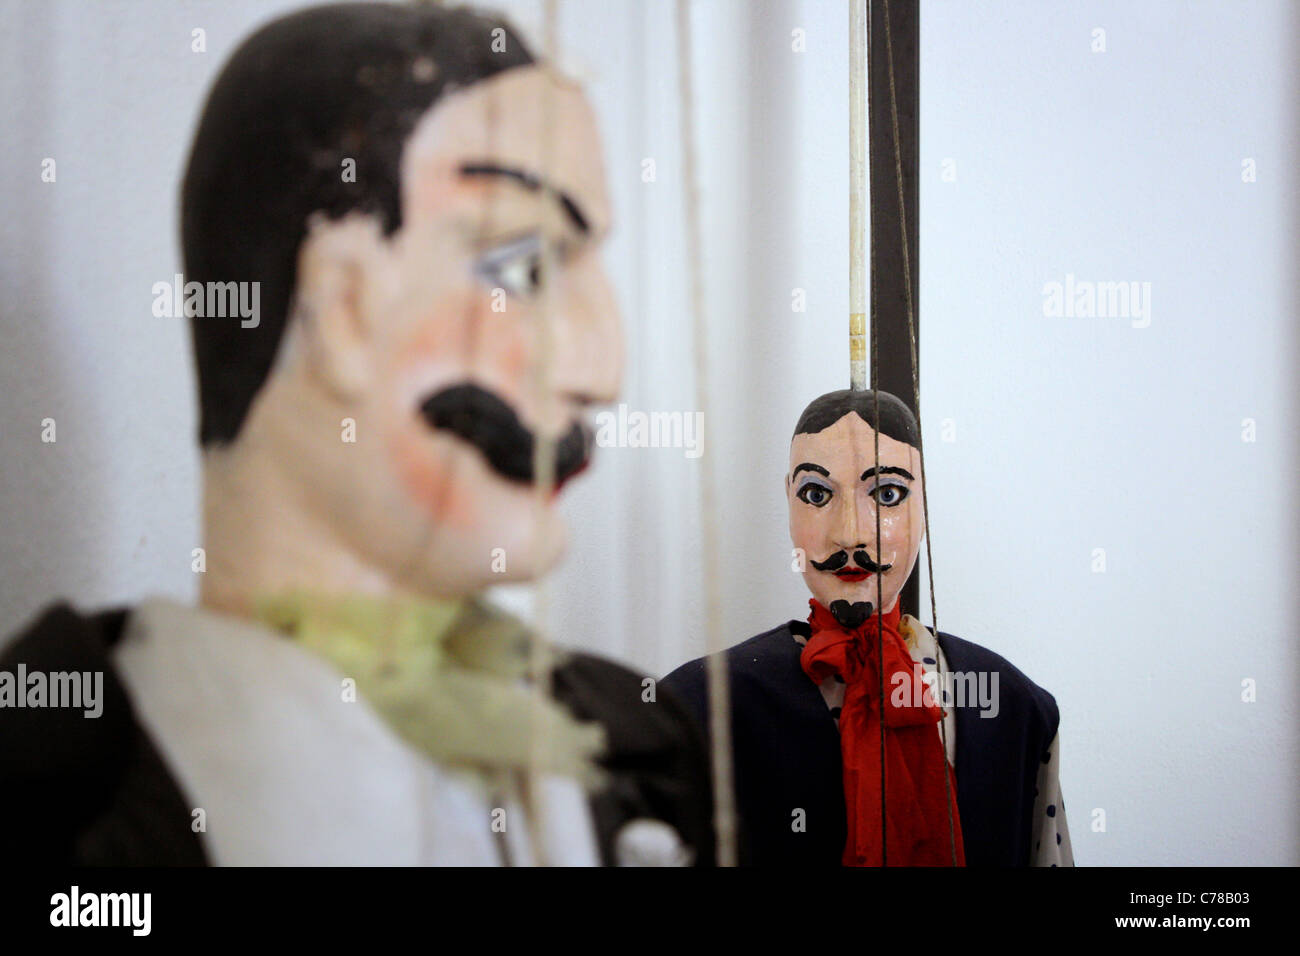 Close of of a large male Sicilian marionette / puppet with mustache out of focus. Focus on puppet in the background Stock Photo